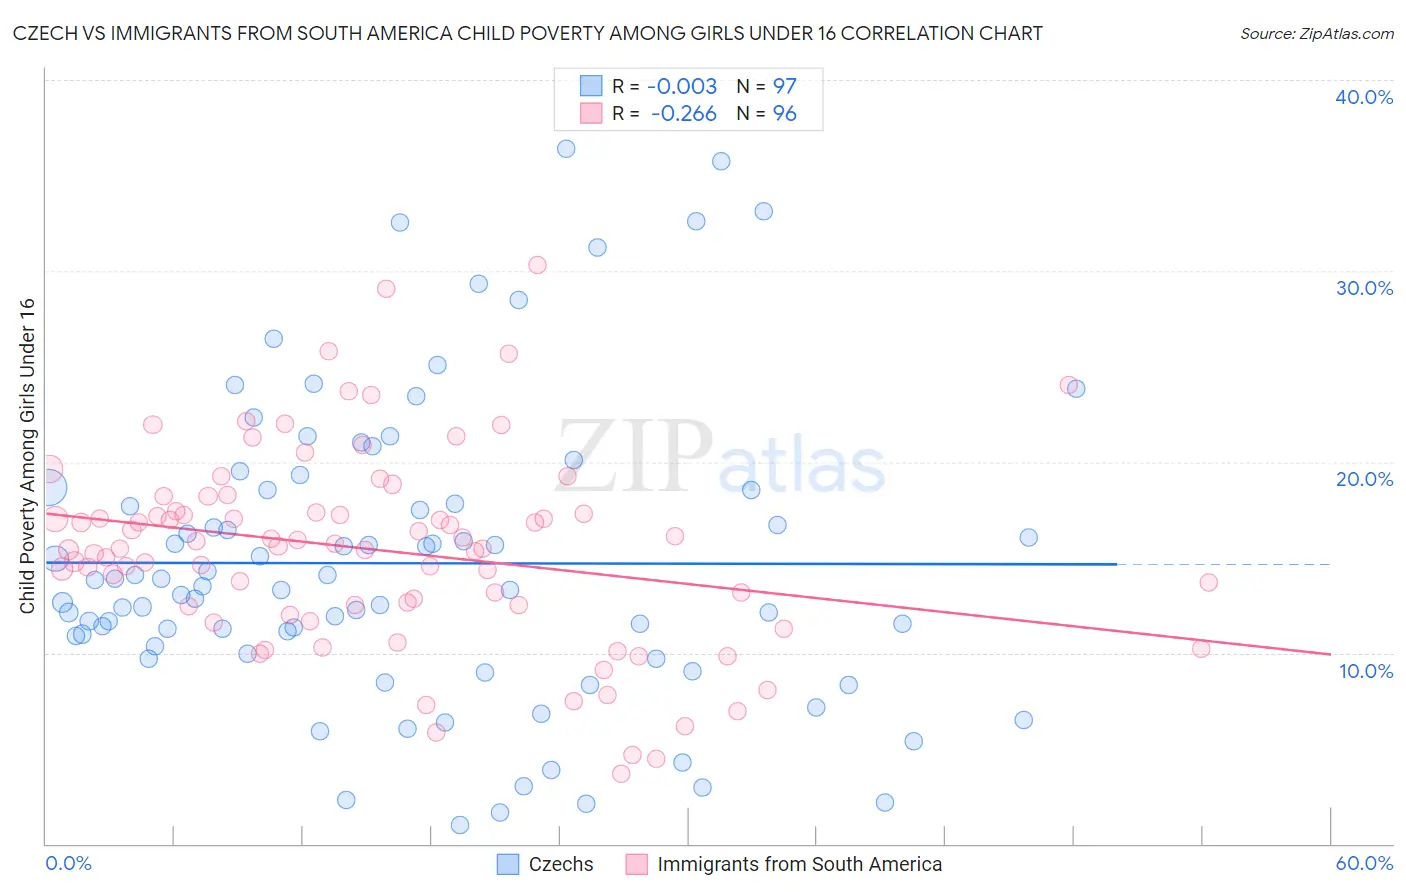 Czech vs Immigrants from South America Child Poverty Among Girls Under 16